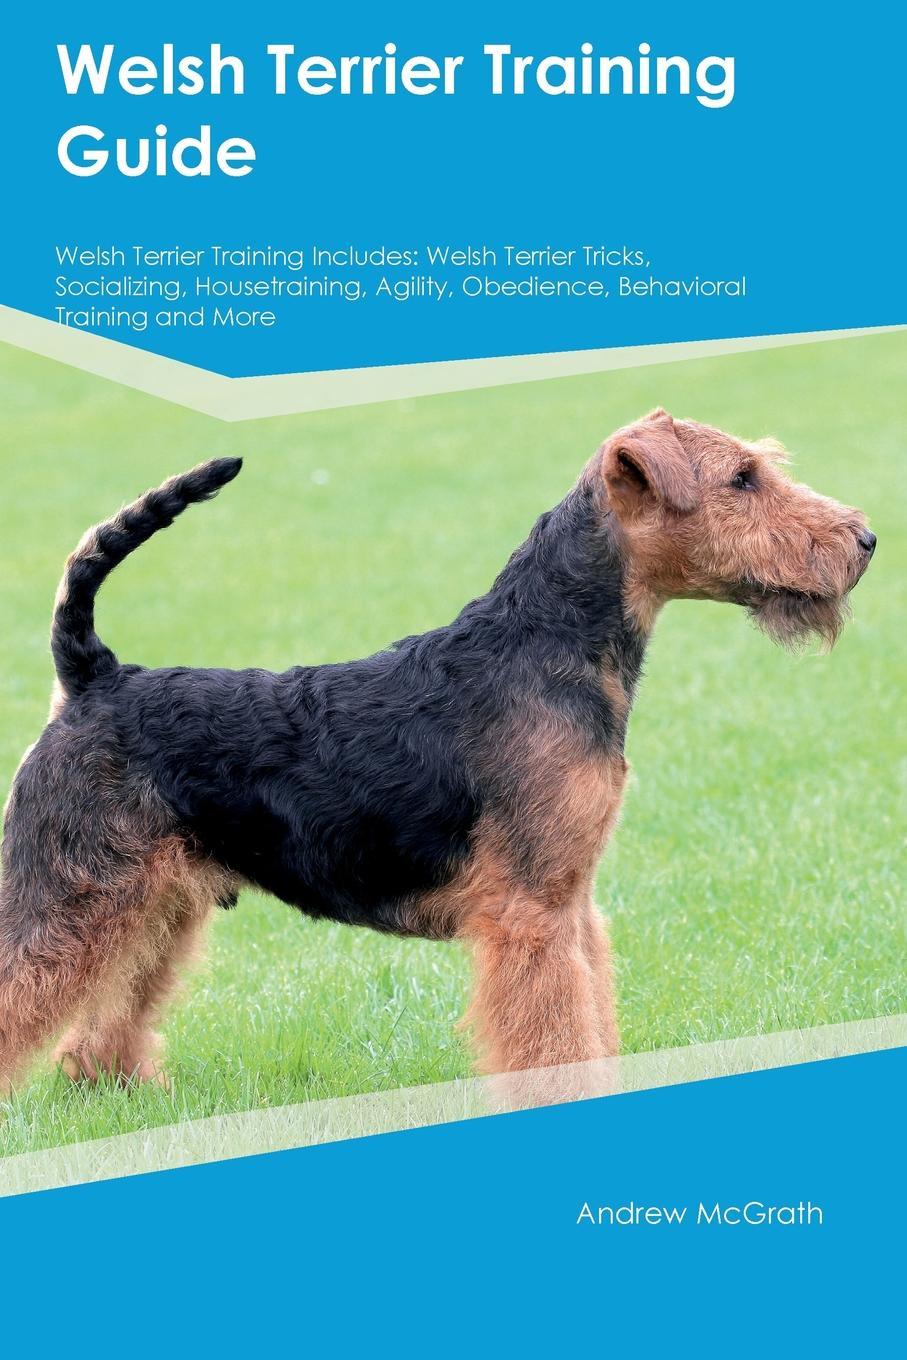 Welsh Terrier Training Guide Welsh Terrier Training Includes. Welsh Terrier Tricks, Socializing, Housetraining, Agility, Obedience, Behavioral Training and More